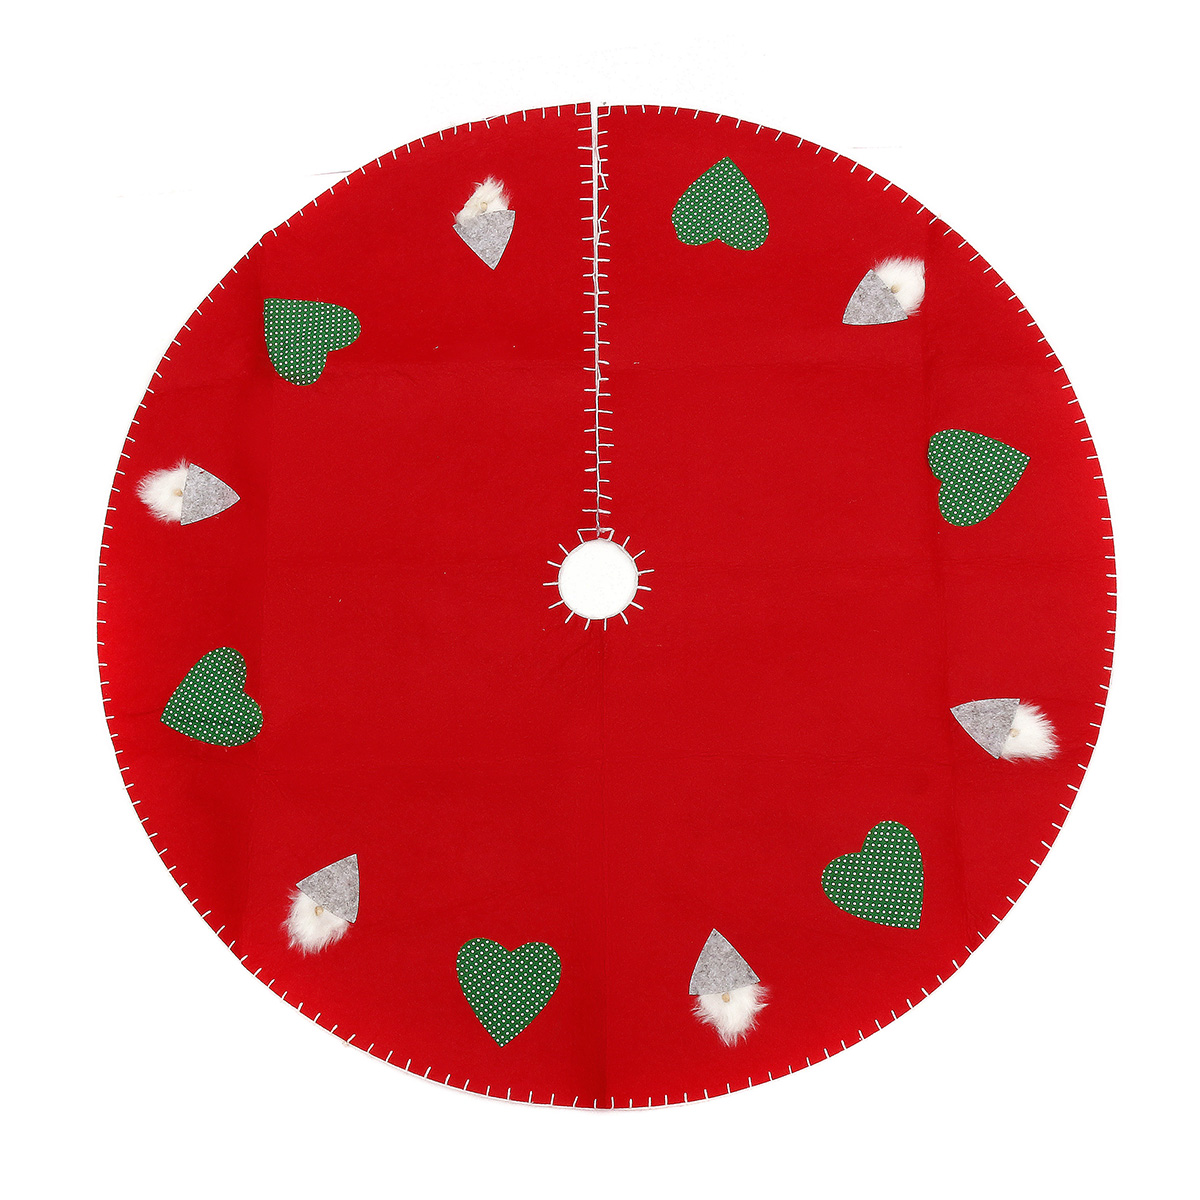 100cm-Red-Christmas-Tree-Skirt-Carpet-Party-Gift-Decor-Pad-Ornaments-Round-Mat-1376090-4